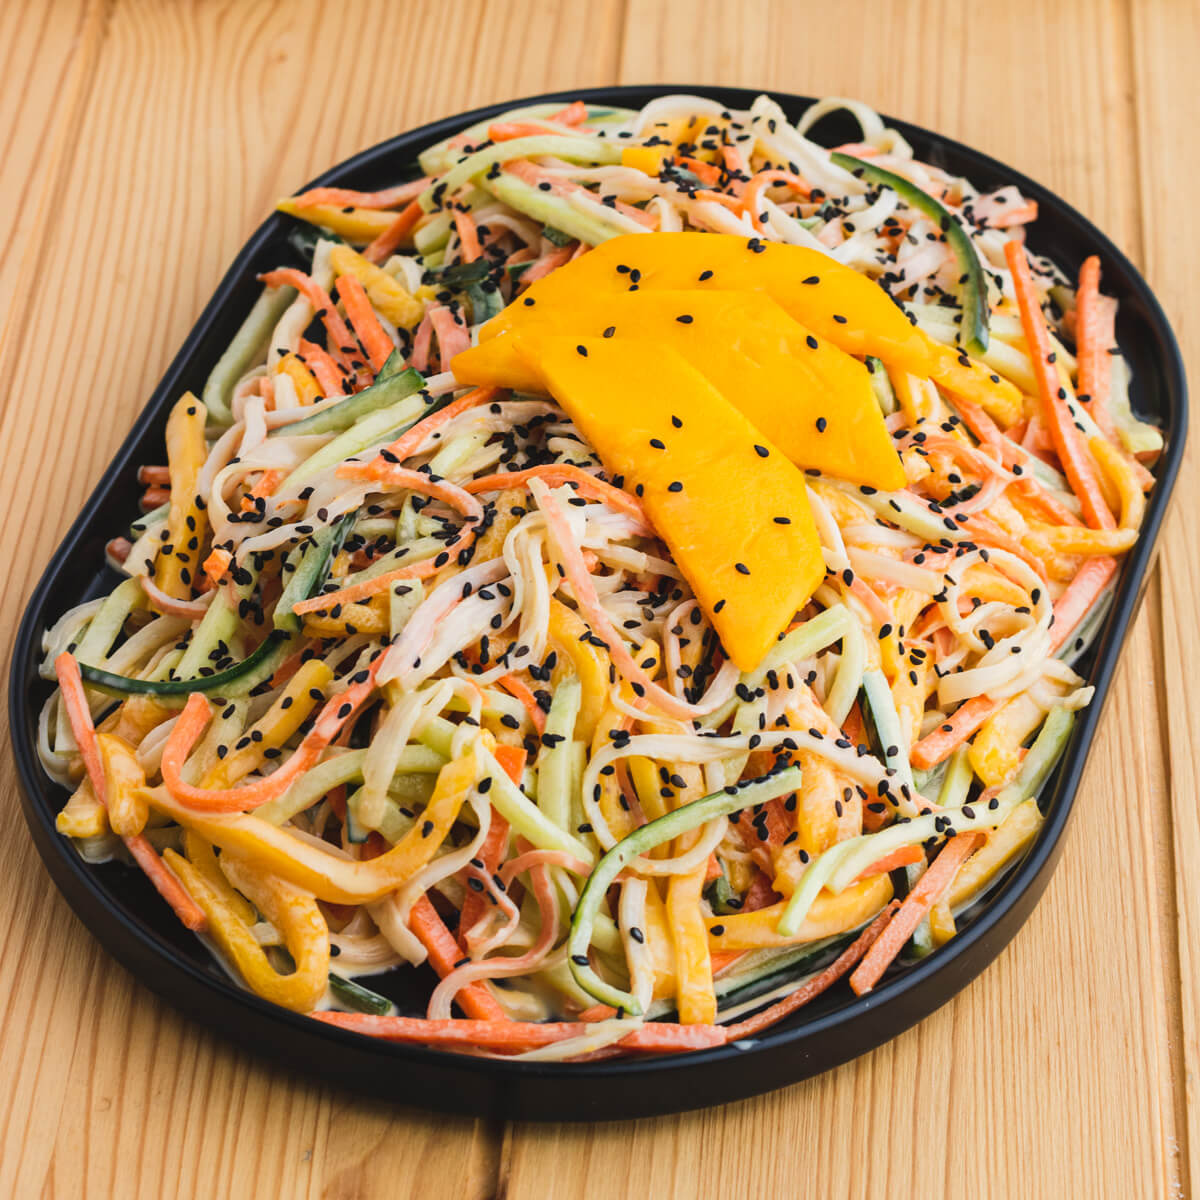 A black platter filled with shredded Kani salad topped with slices of mango, black sesame seeds, and chopped scallions.